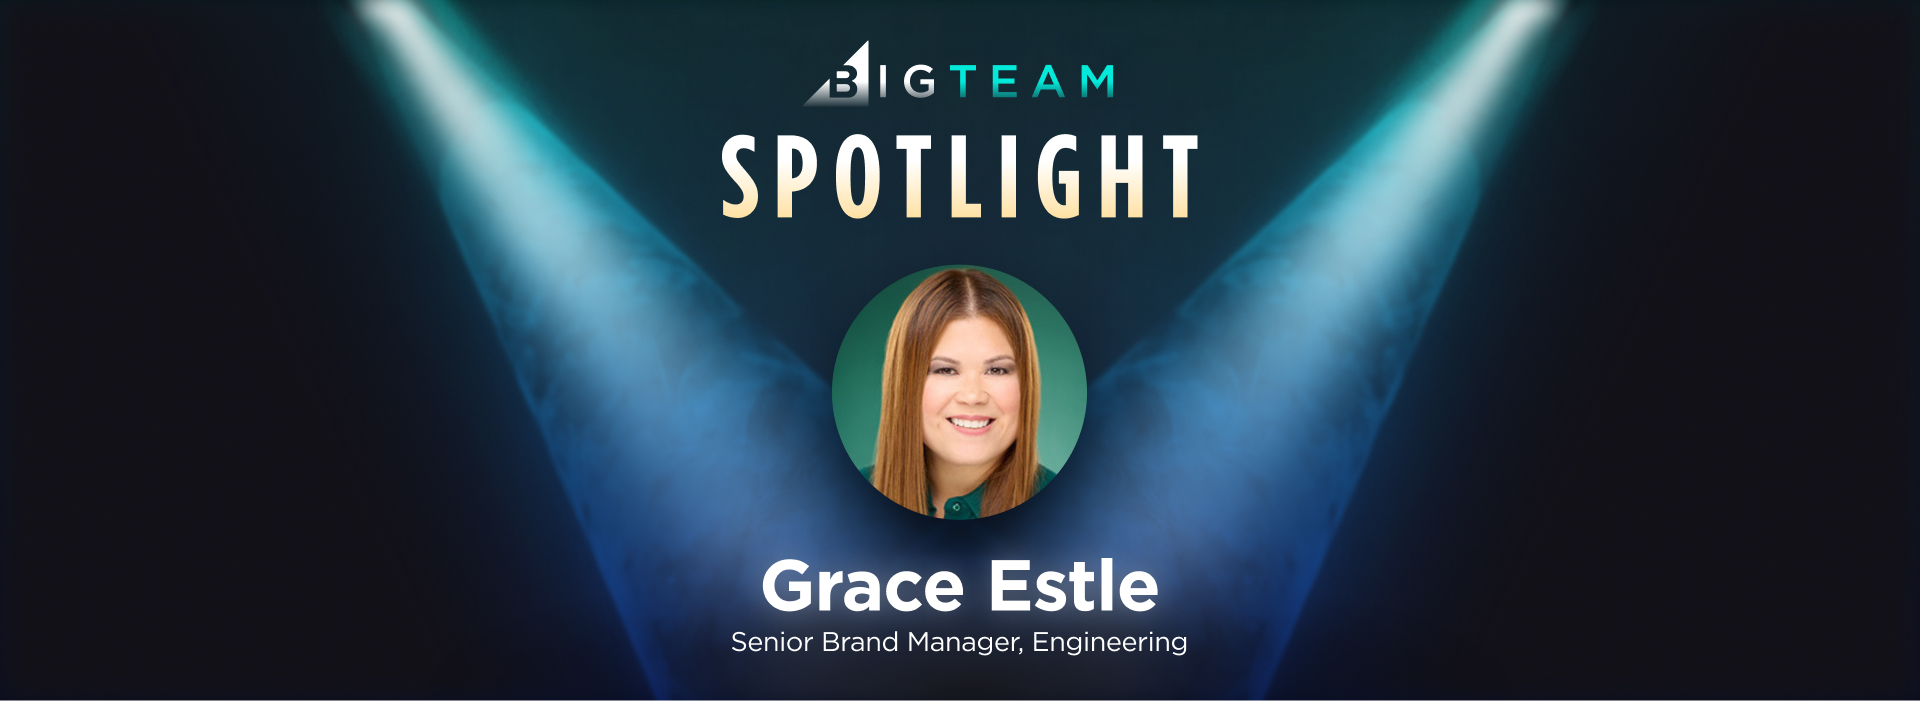 BIGTeam Spotlight: How Grace Estle is Elevating the BigCommerce Brand and Herself